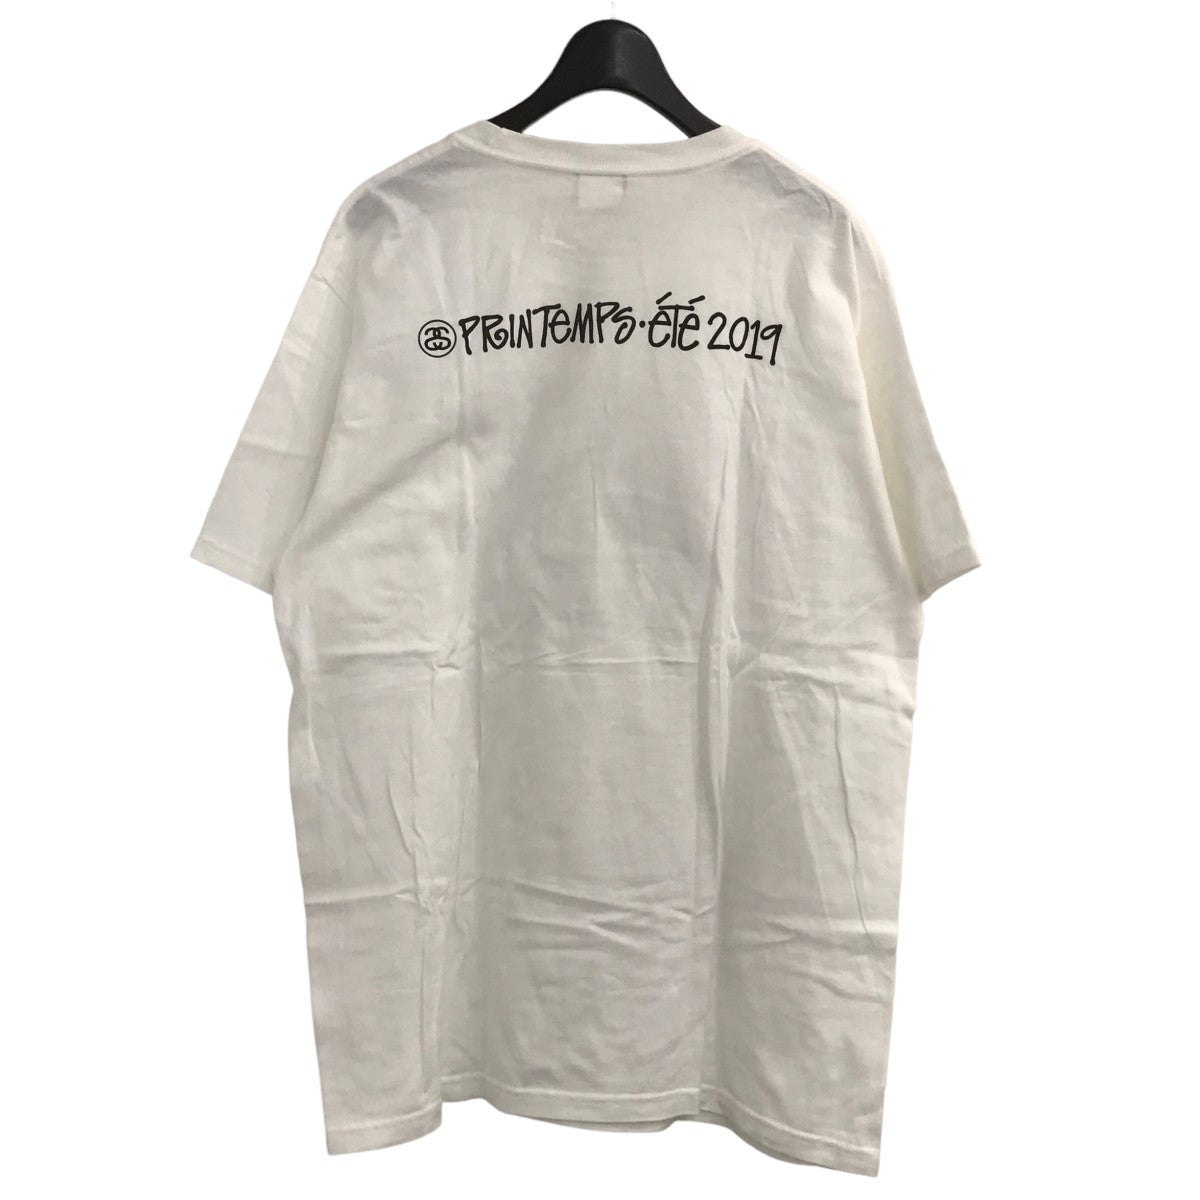 stussy(ステューシー) 19SSPRINTEMPS ete Campaign Teeフォトプリント ...